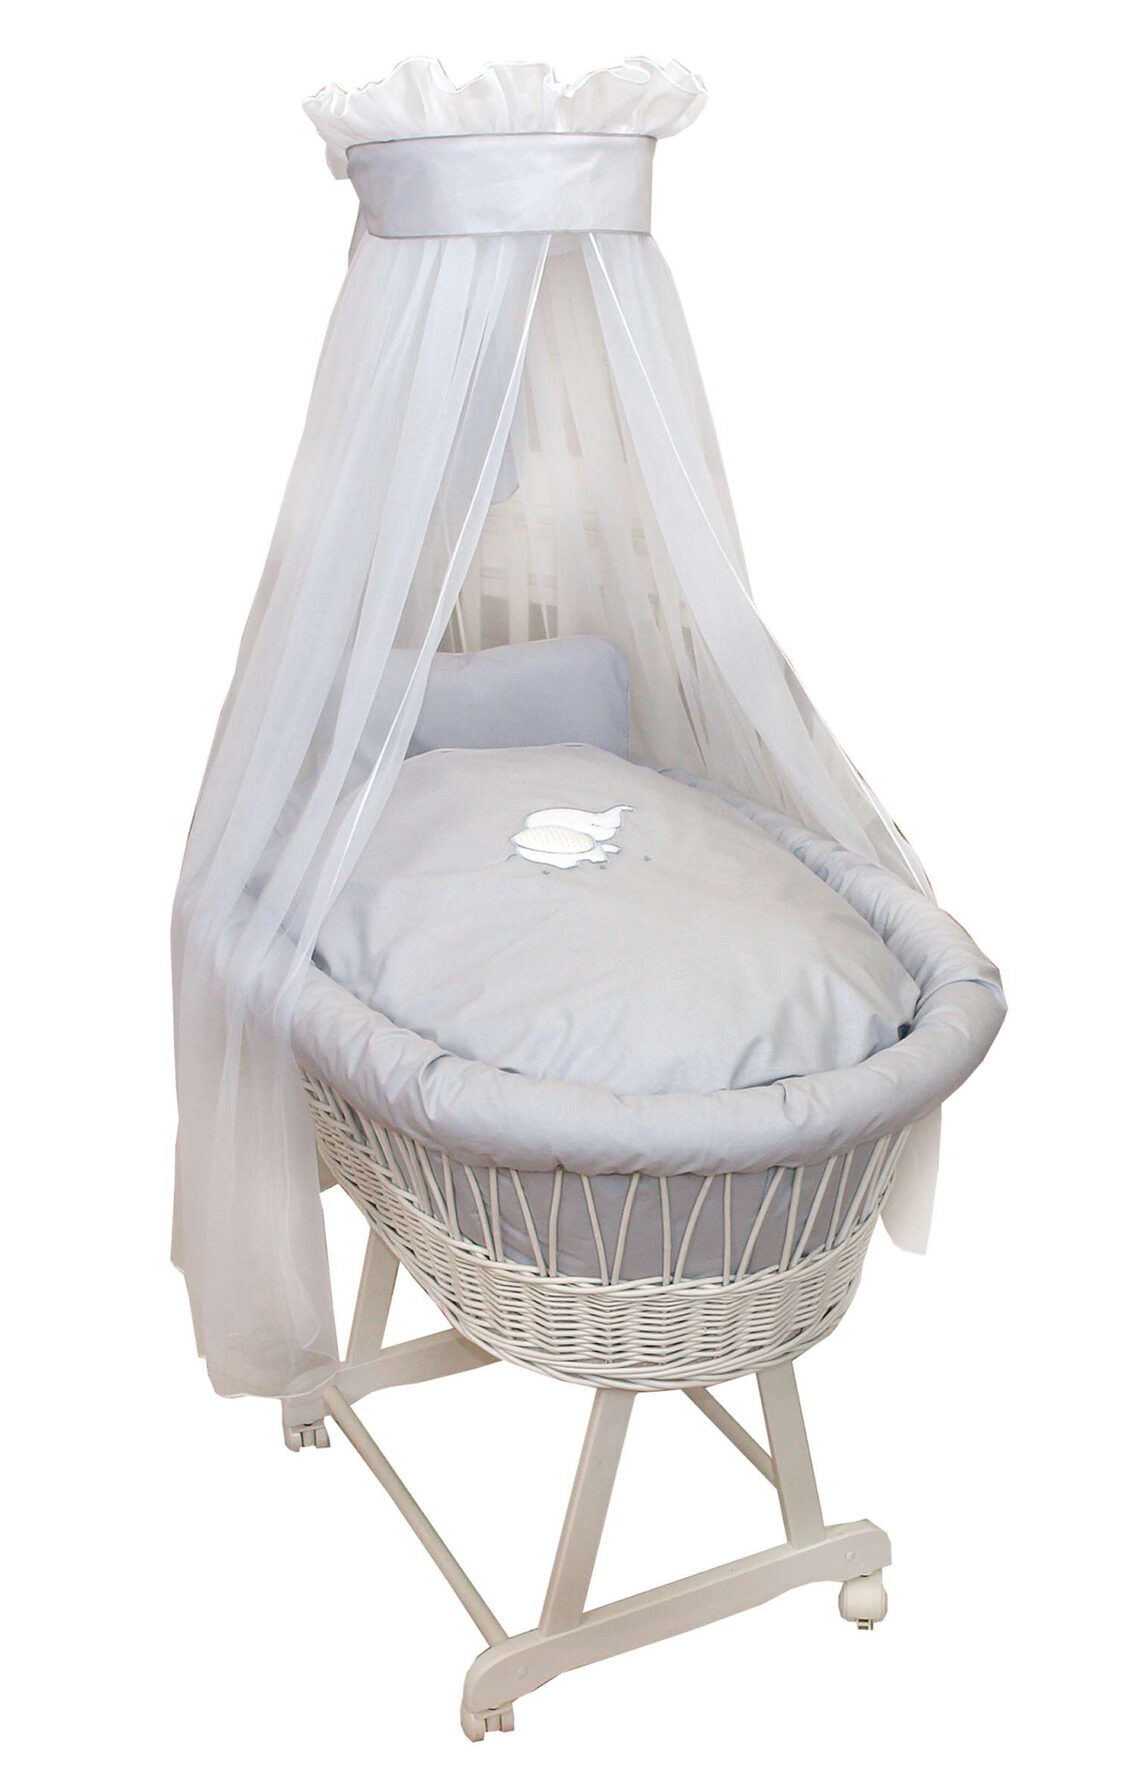 Moses wicker basket with bedding